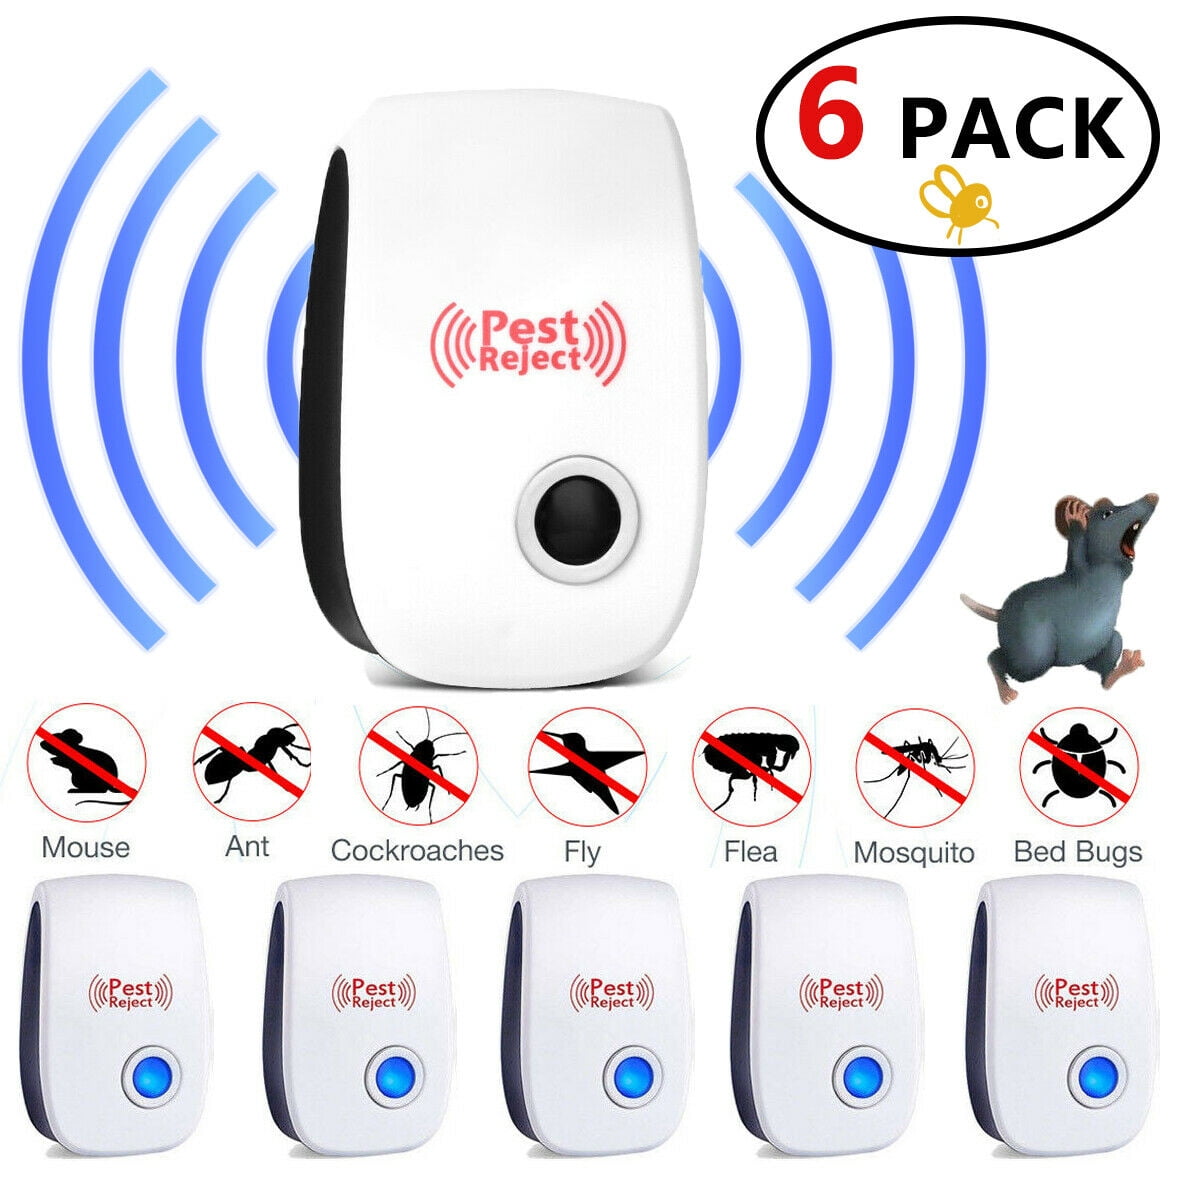 Electronic Ultrasonic Pest Reject Anti Mosquito Cockroach Mouse Killer Repeller 